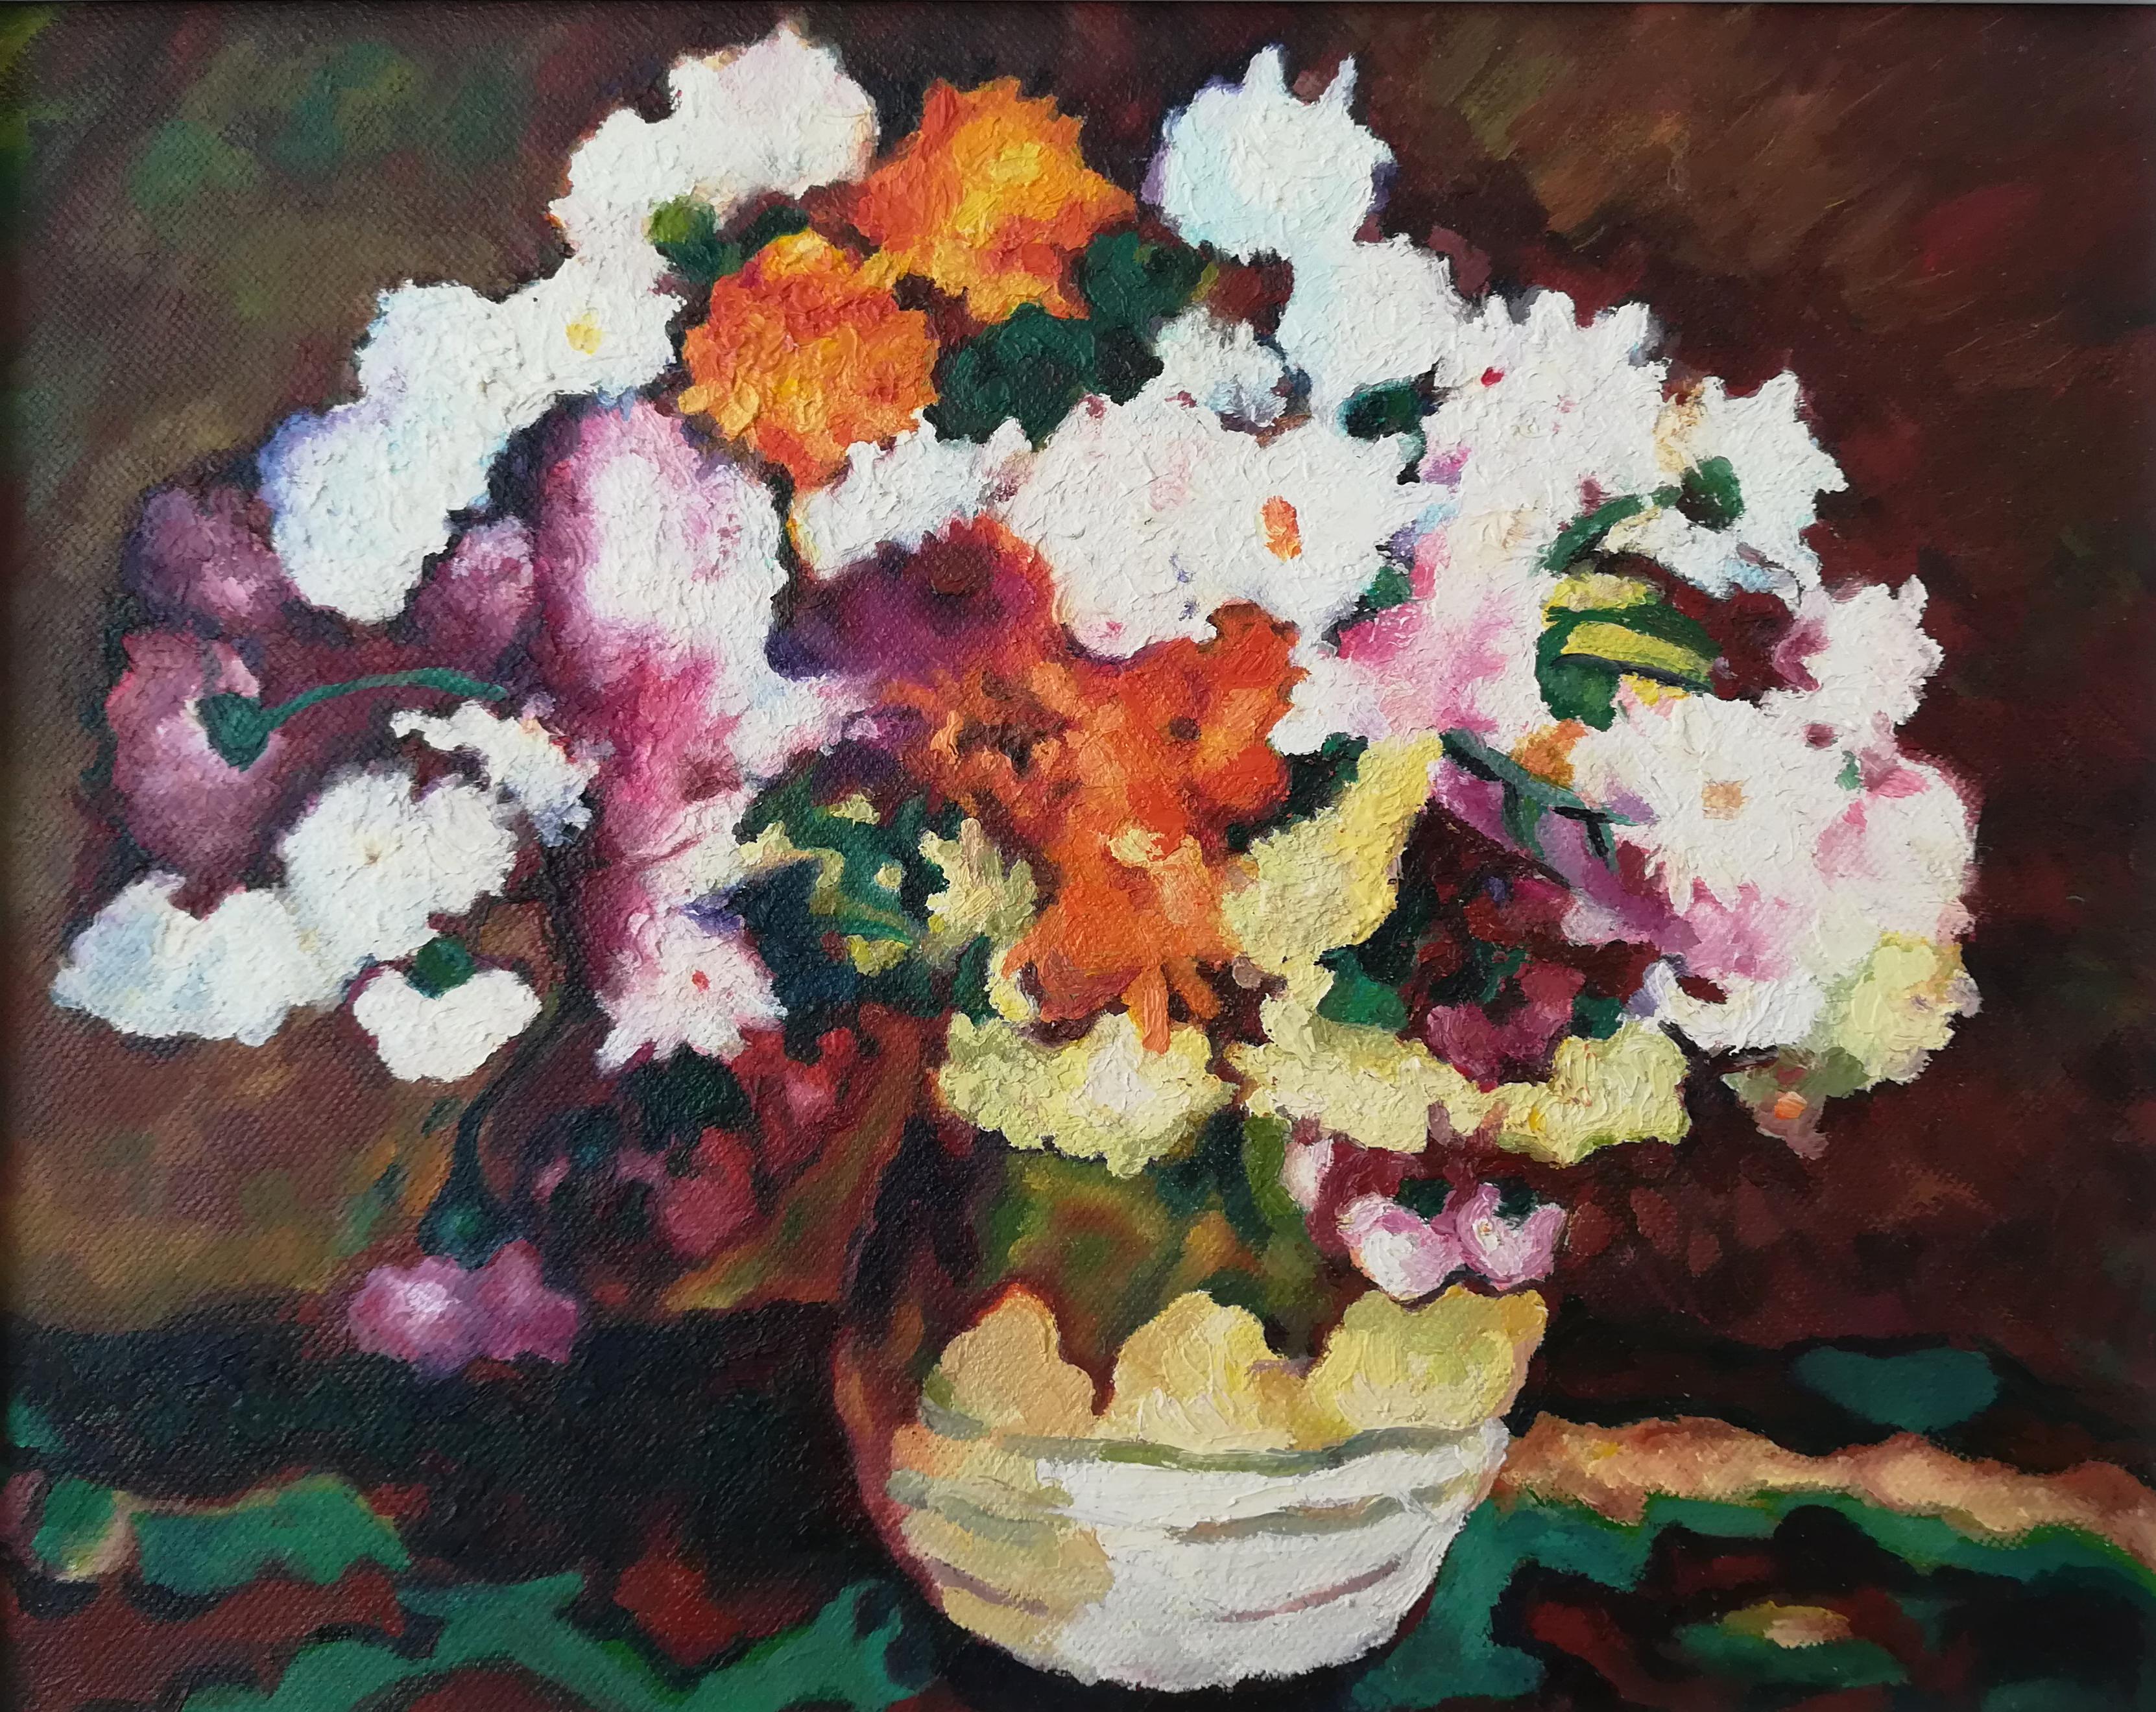 French Contemporary Art by Diana Torje - Colored Flowers